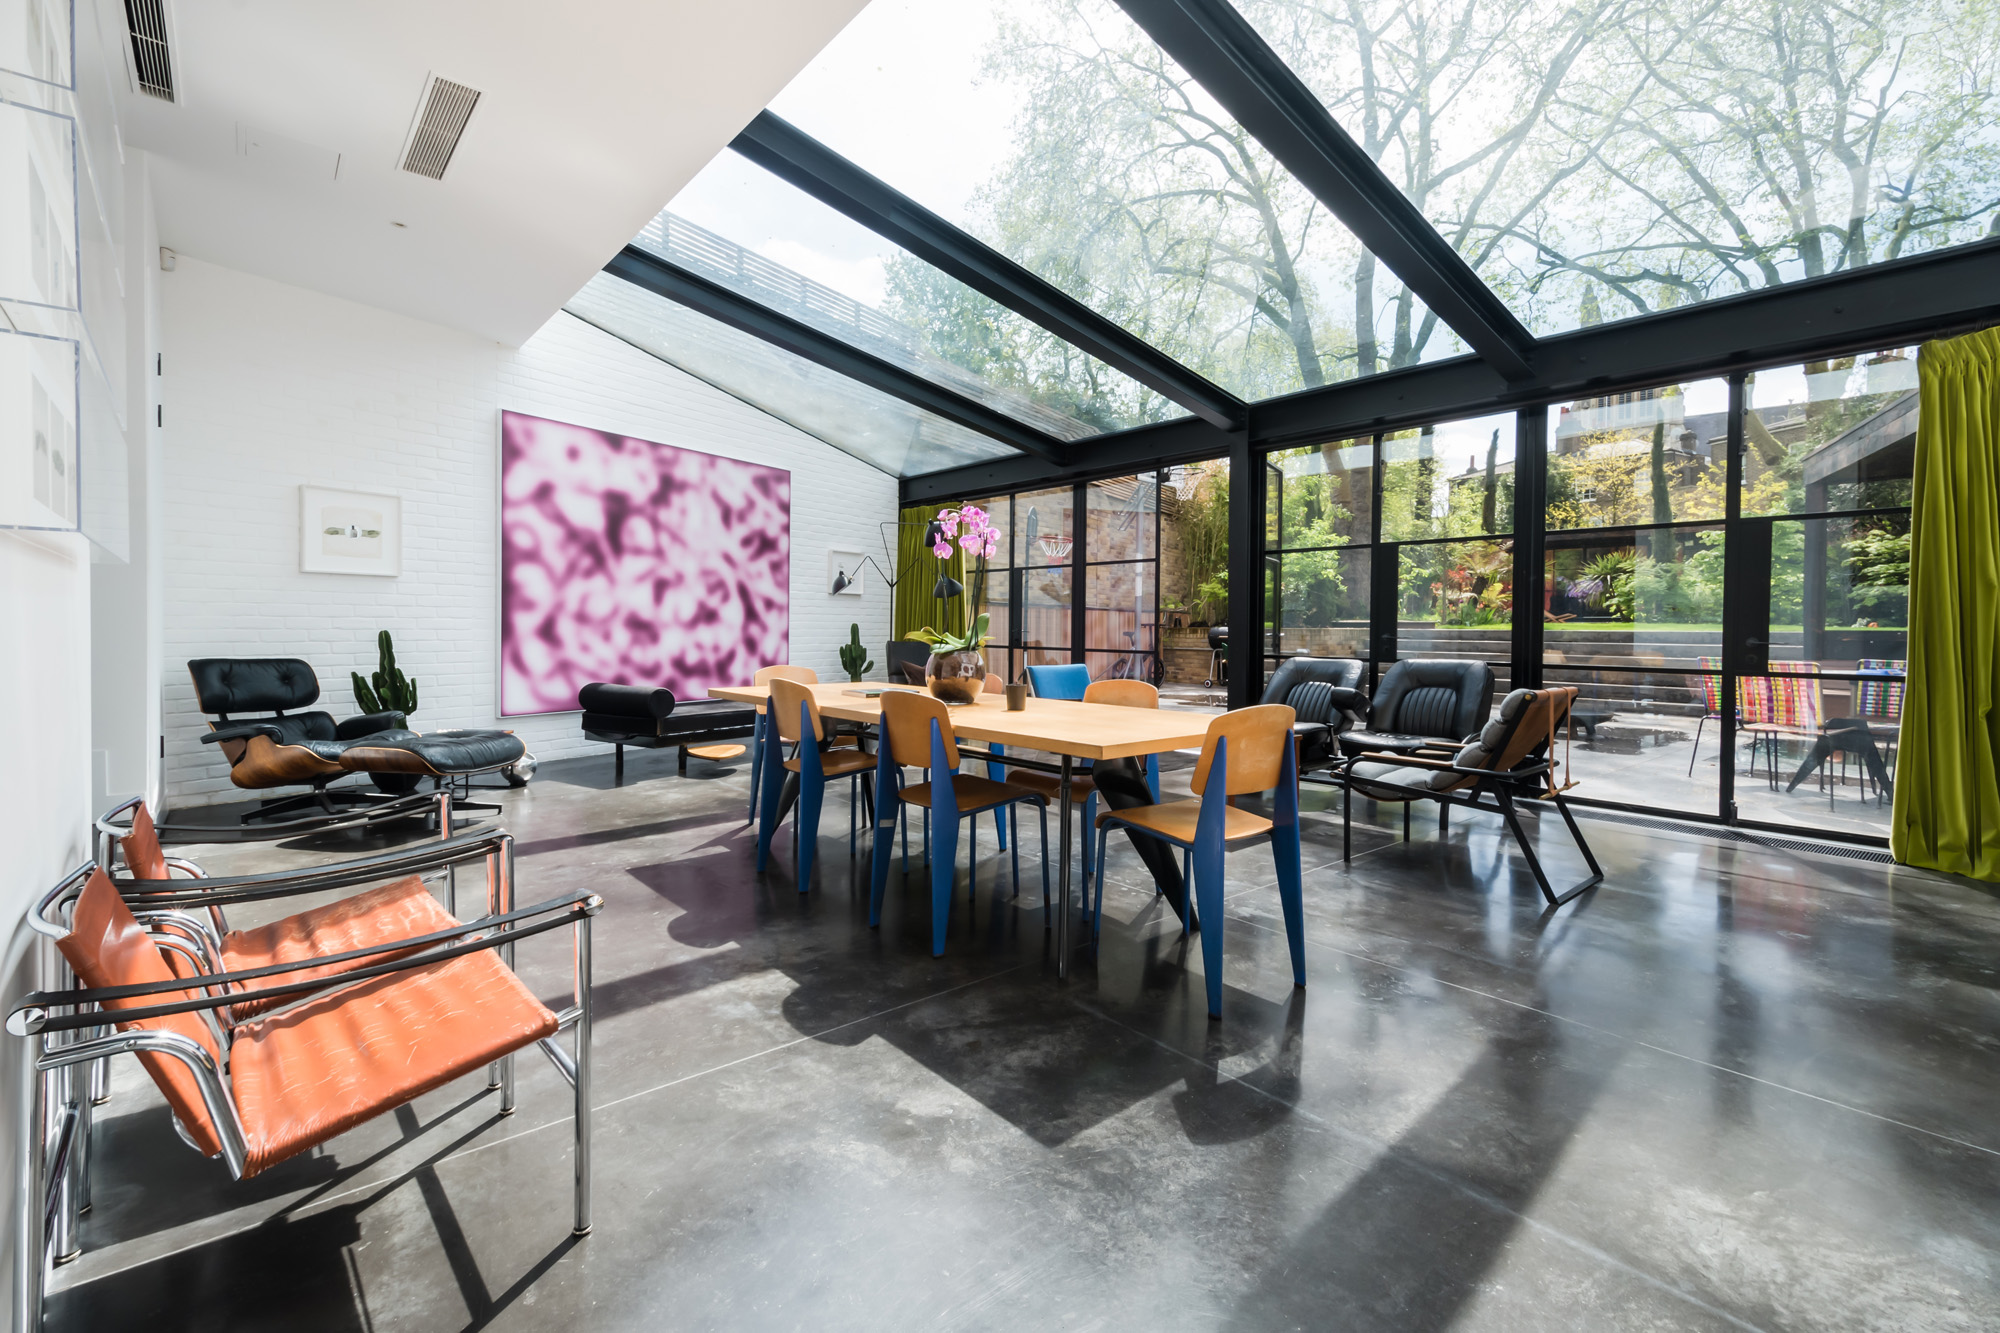 For Sale: Westbourne Park Villas Notting Hill W2 glass extension and dining room